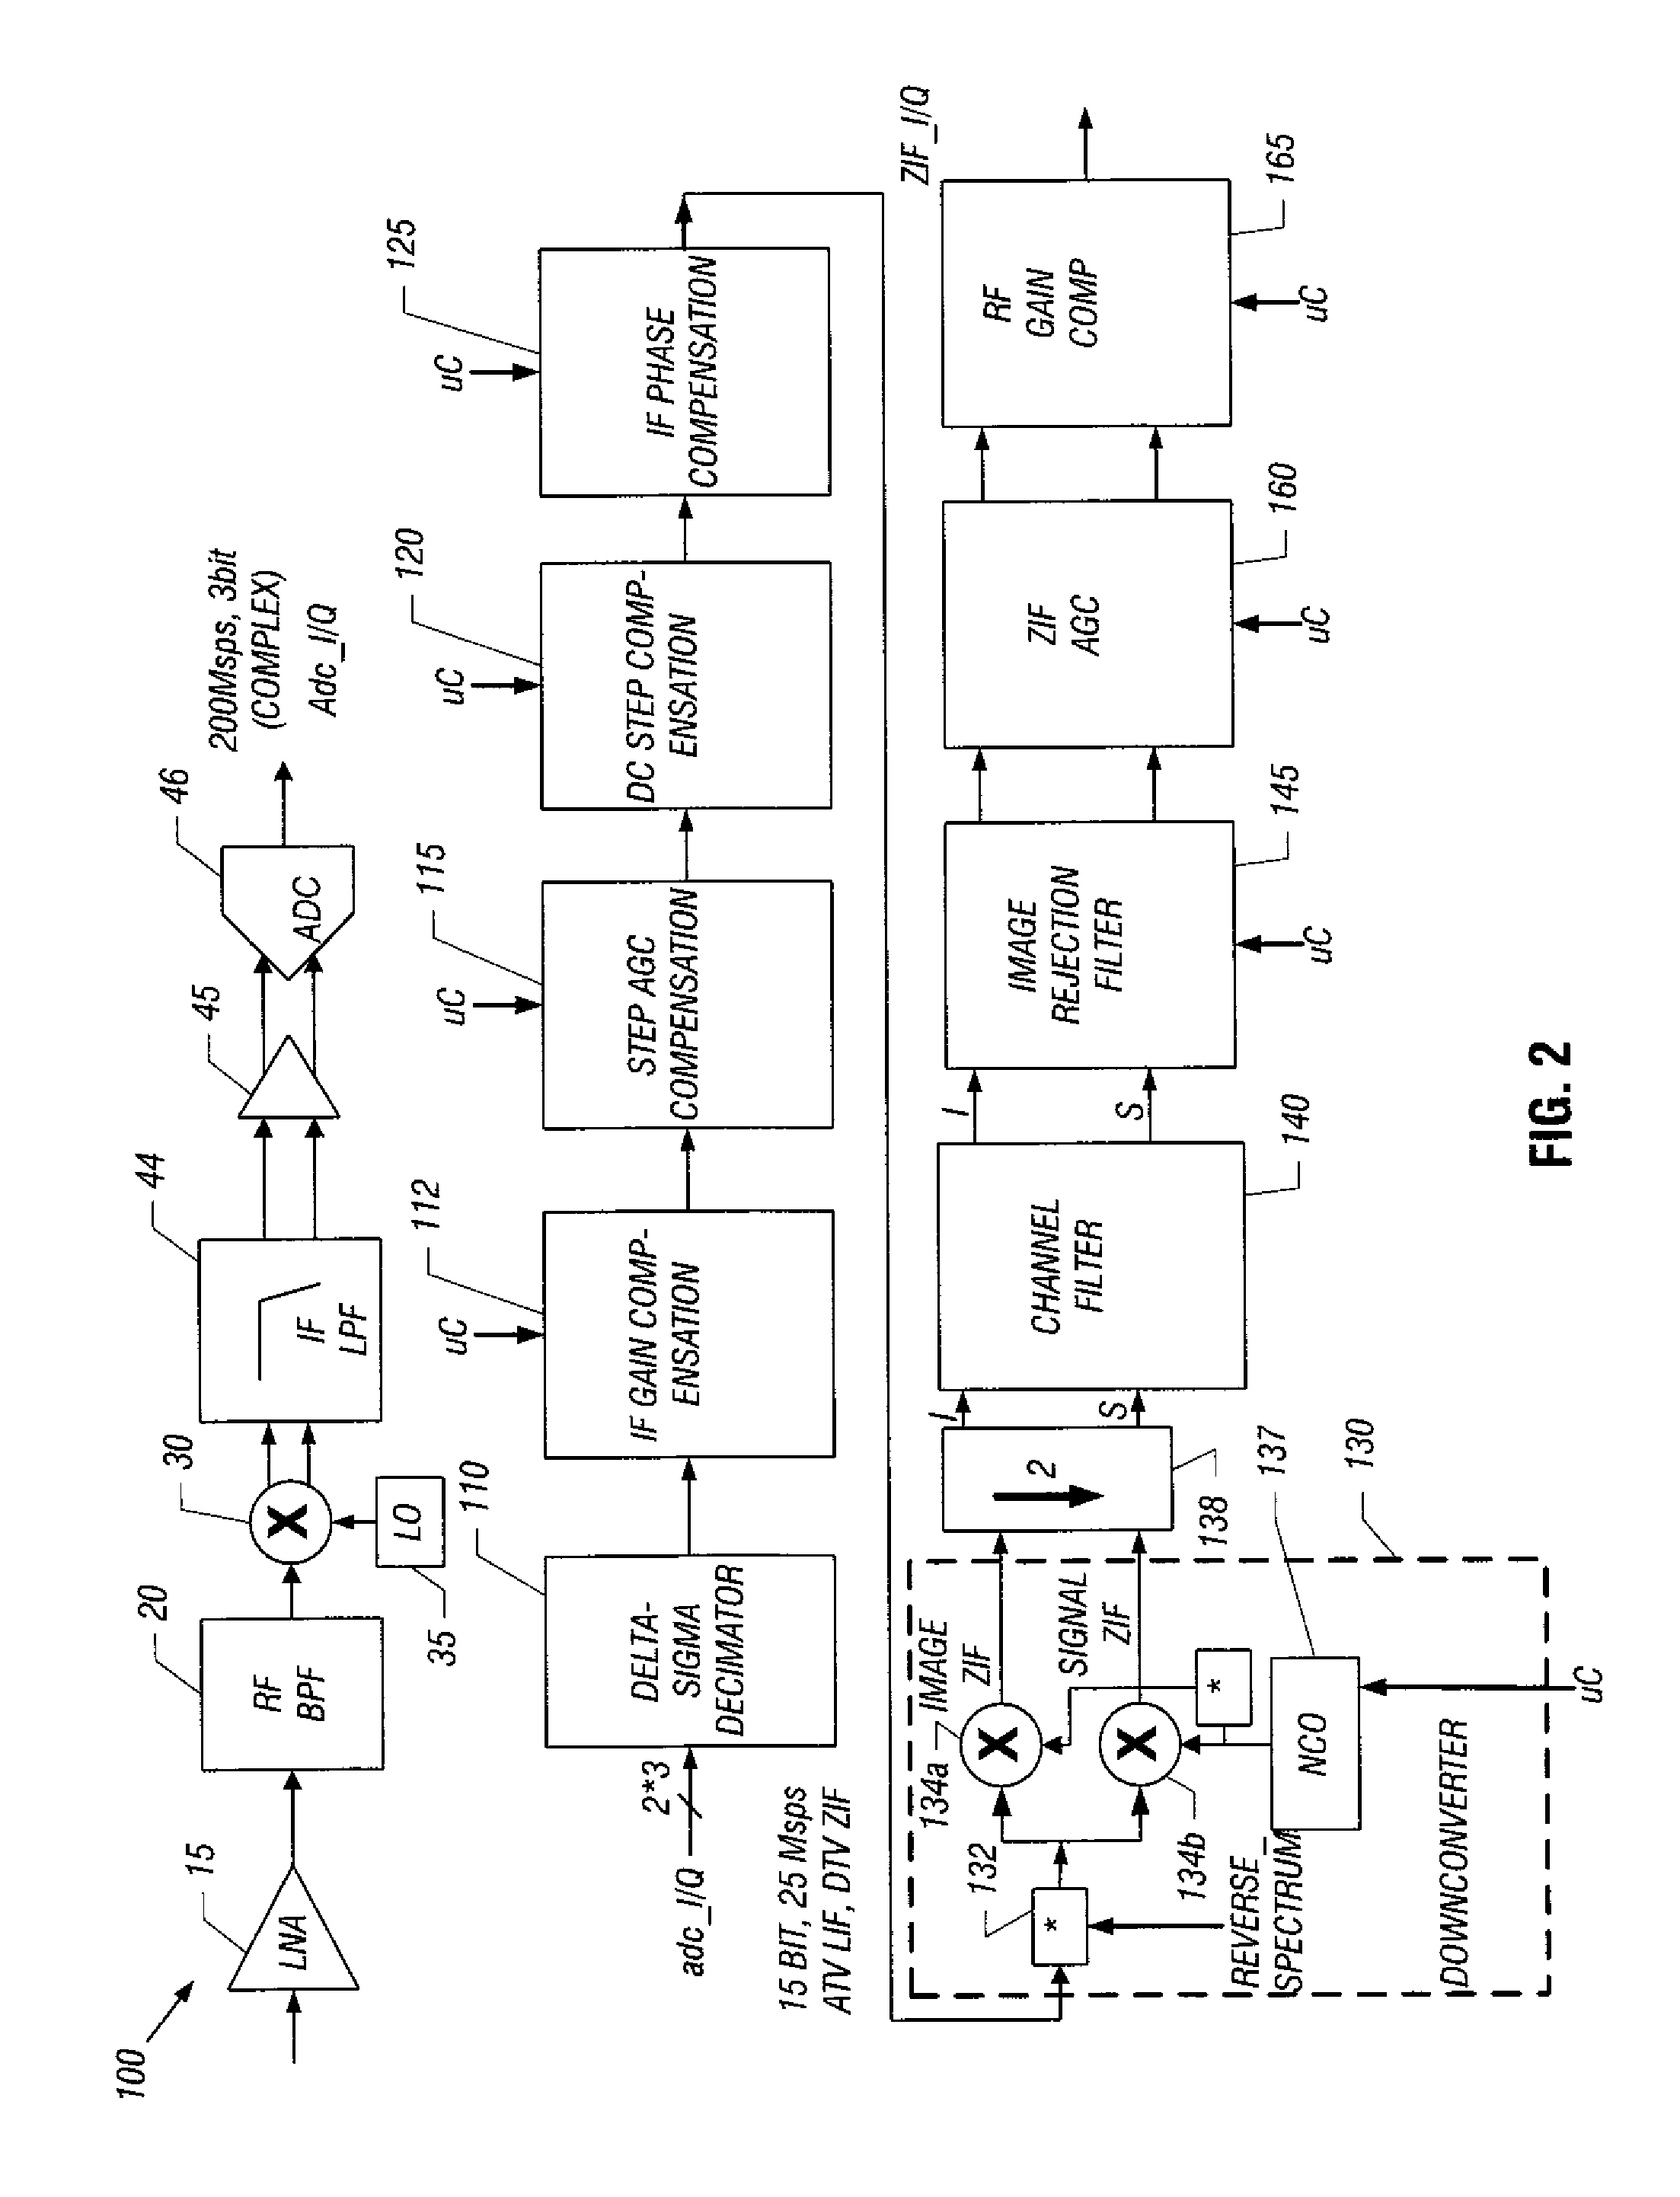 Digital Signal Processor (DSP) Architecture For A Hybrid Television Tuner